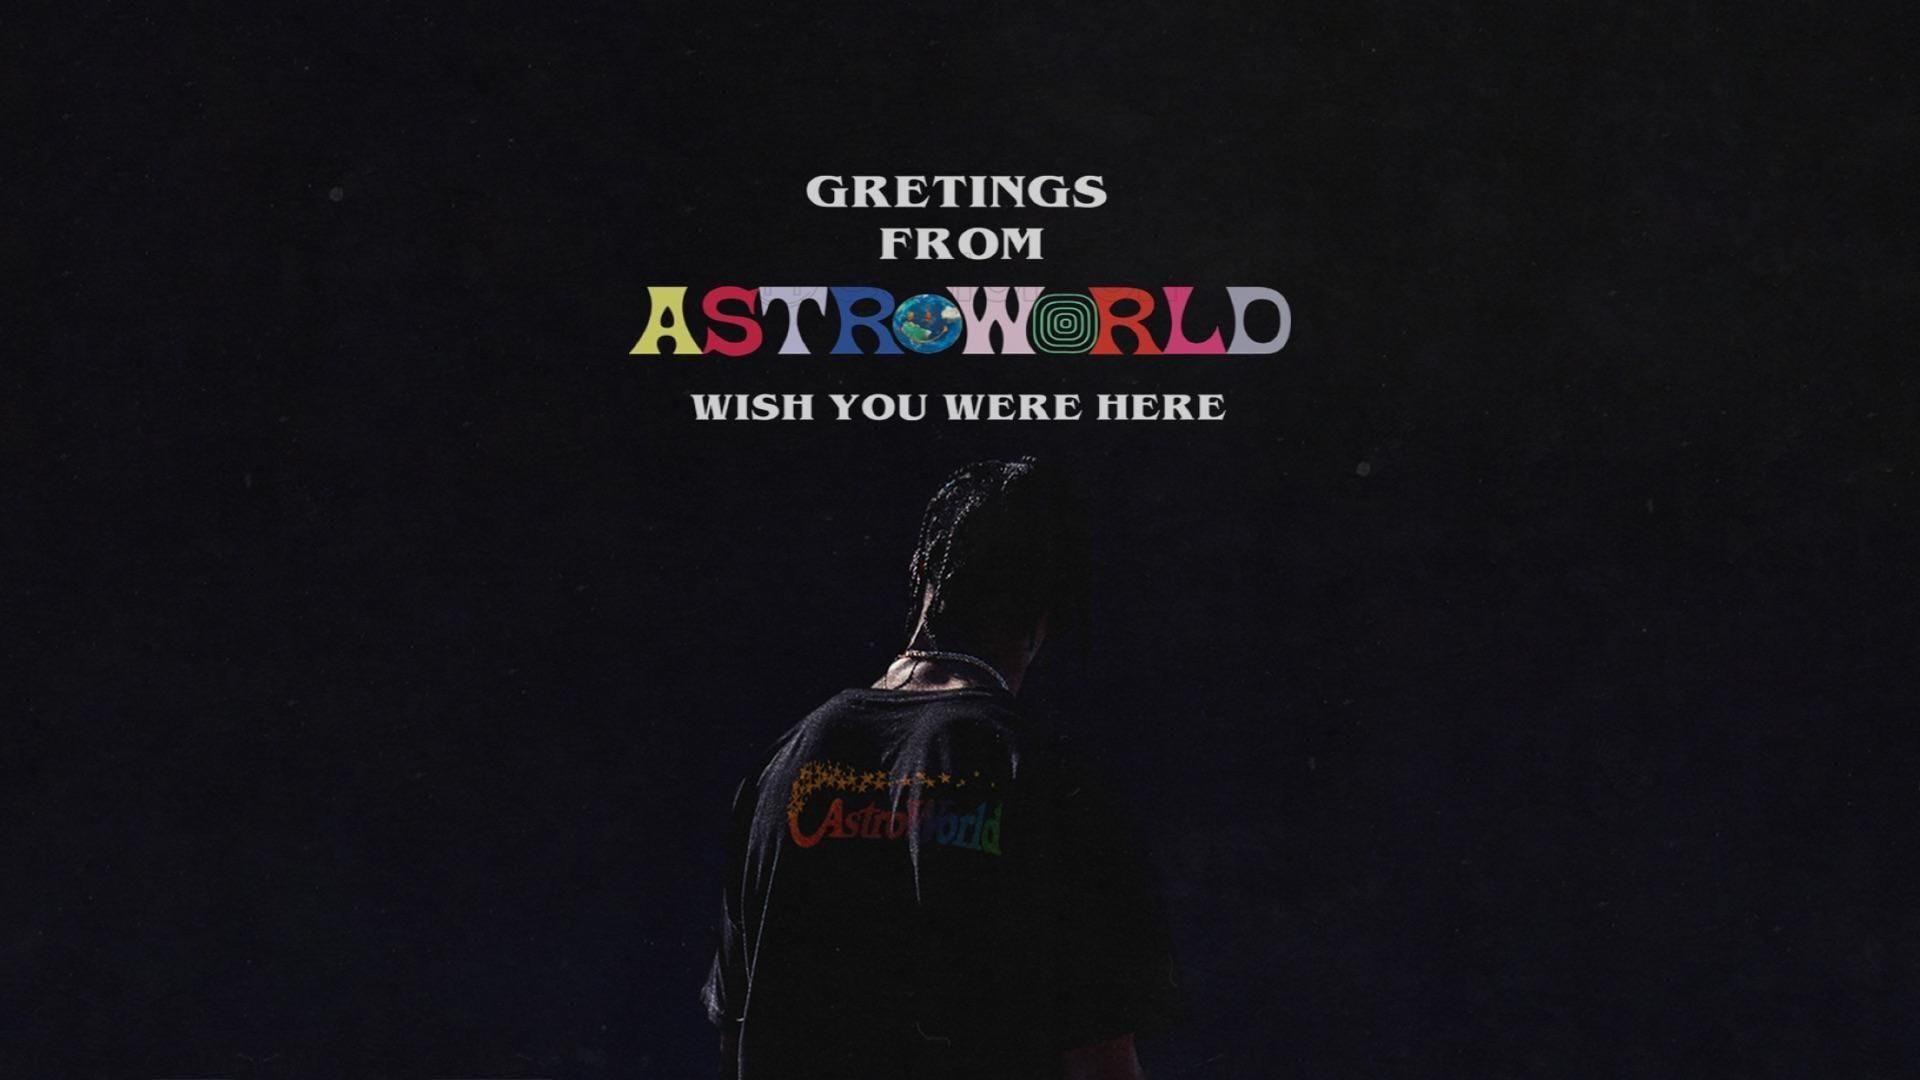 Astroworld wallpaper for mobile phone tablet desktop puter and other devices hd and k wallpapersâ travis scott quotes travis scott wallpapers travis scott